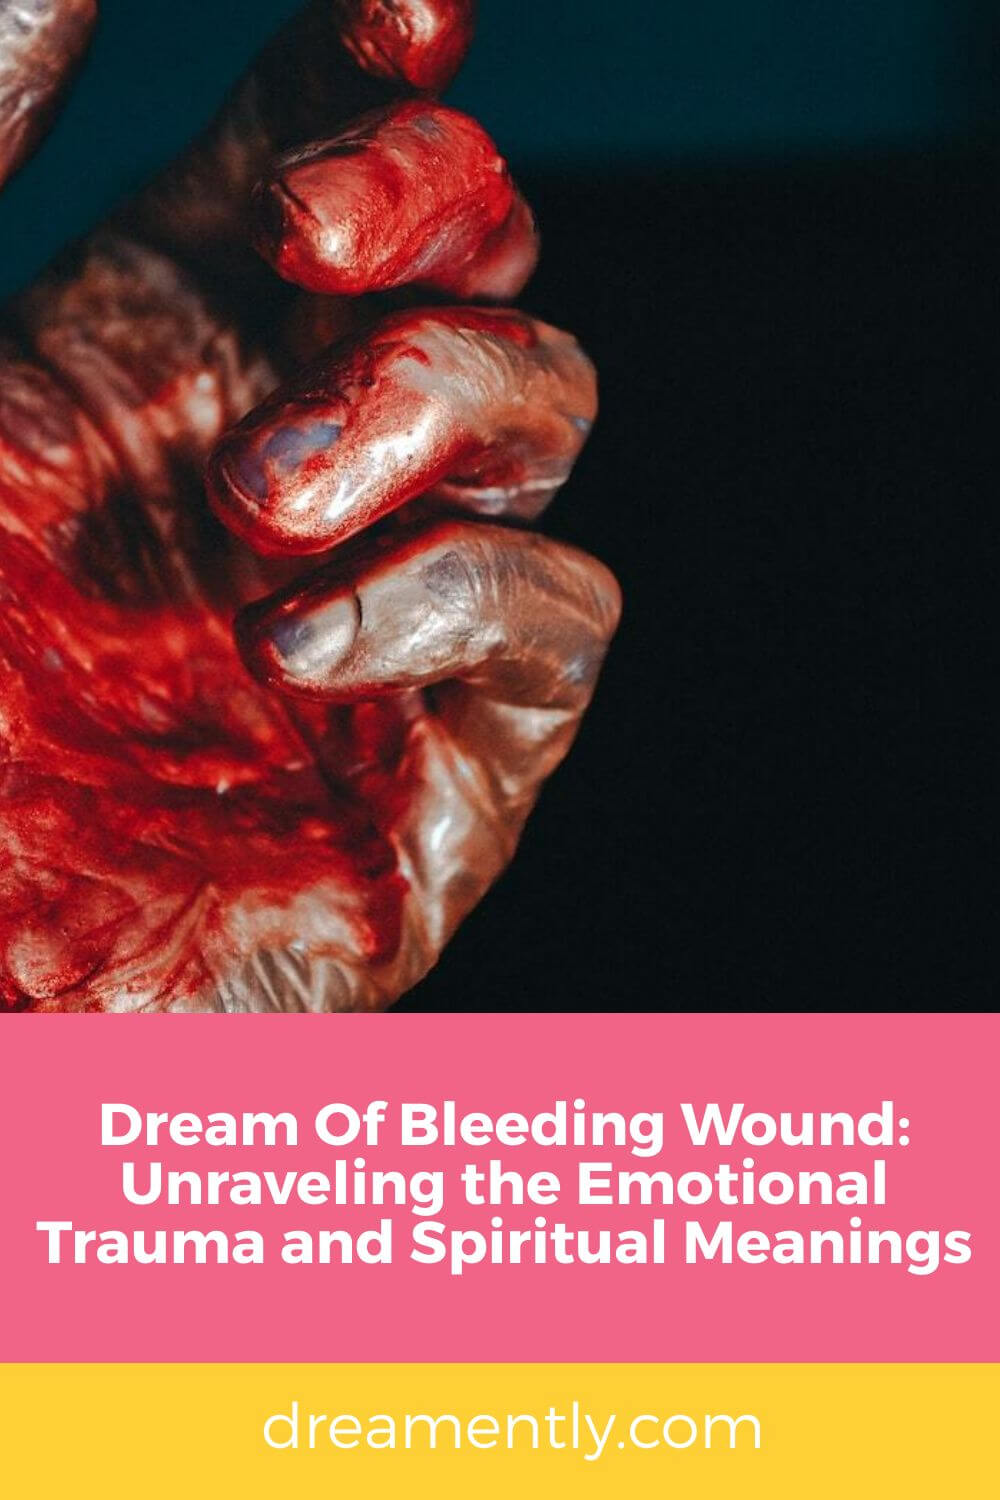 Dream Of Bleeding Wound- Unraveling the Emotional Trauma and Spiritual Meanings (2)